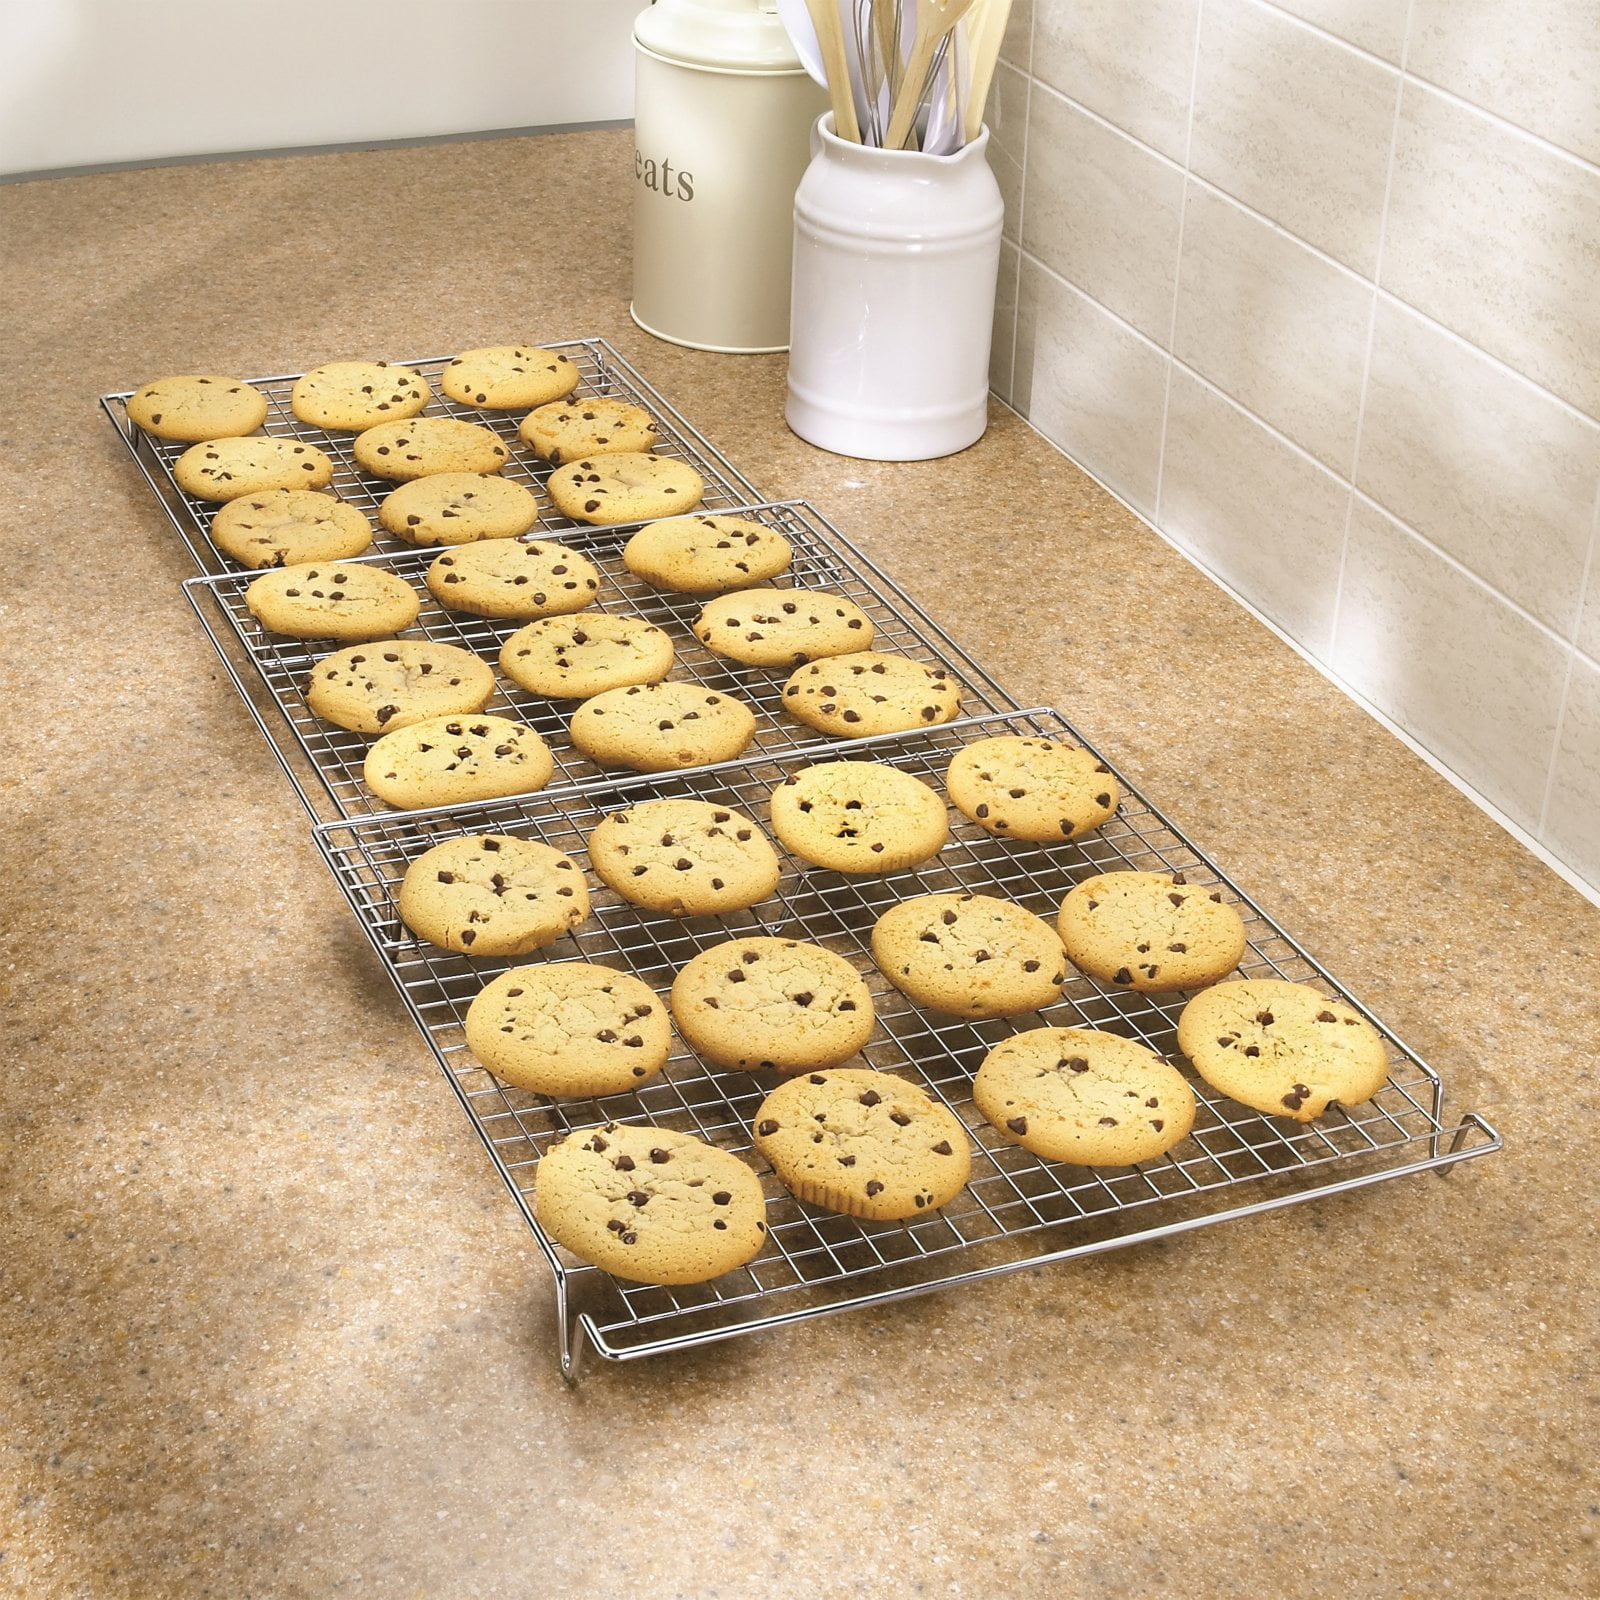 3 Tier Baking Rack with 3 Non-Stick Cookie Sheets – Nifty Home